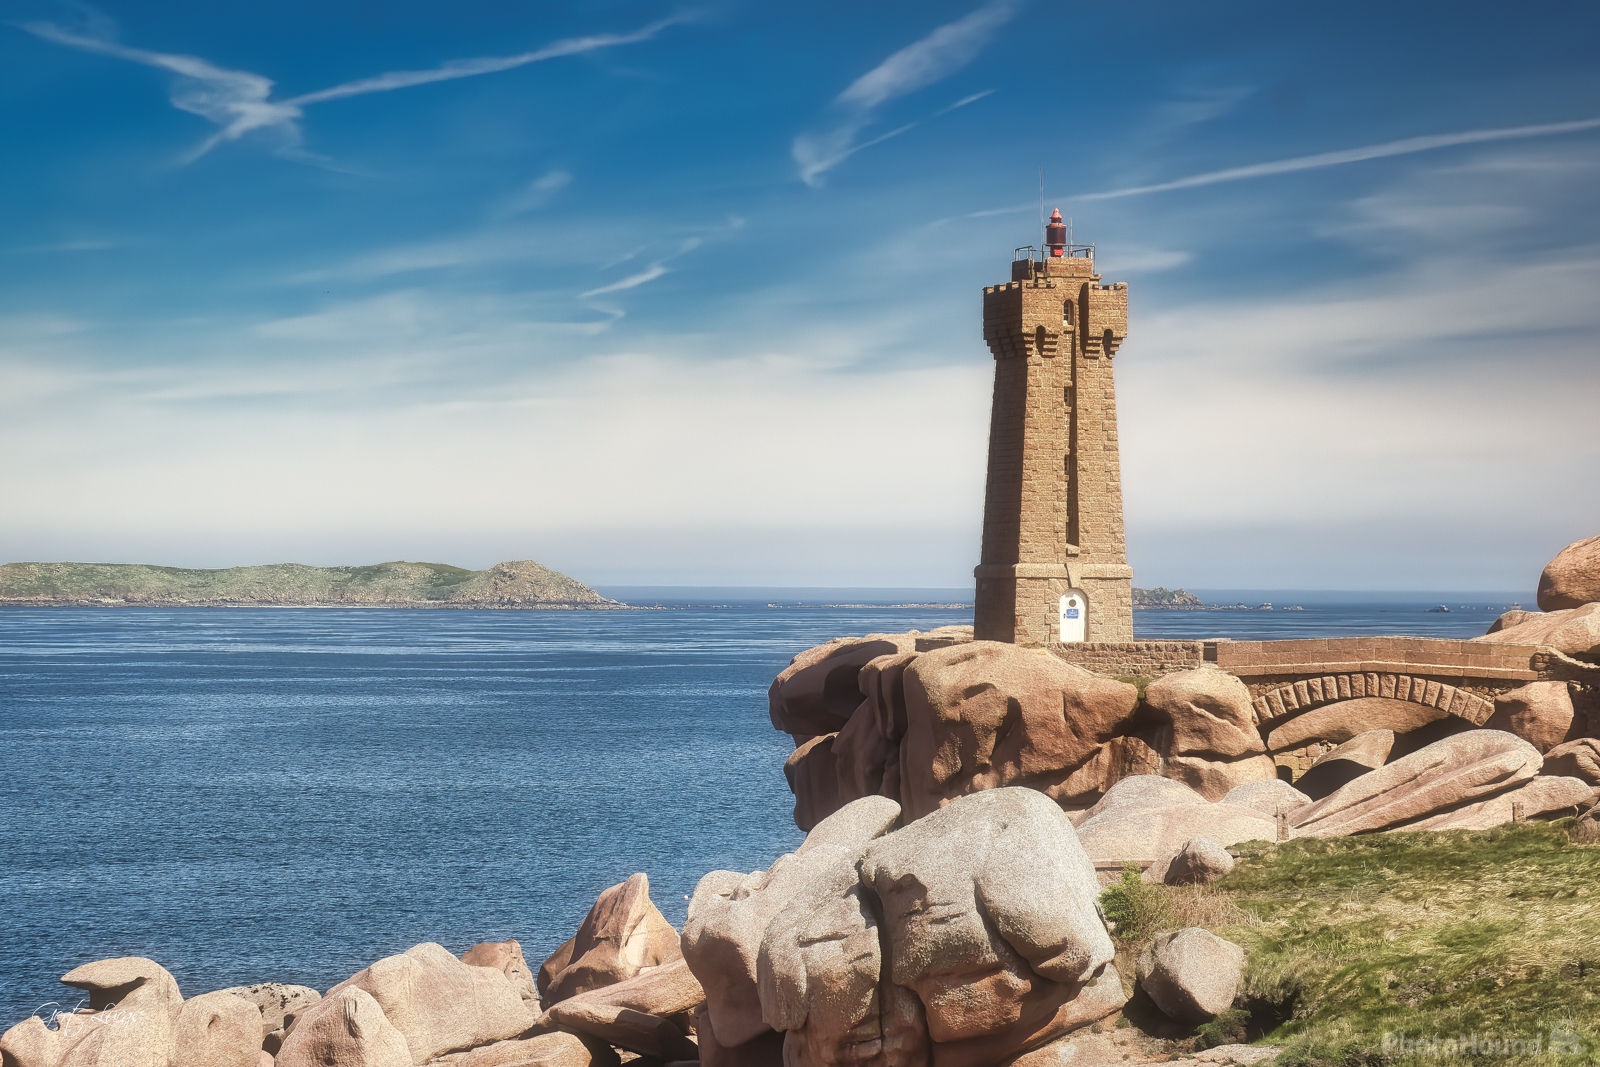 Image of Mean Ruz Lighthouse, Perros-Guirec, France by Gert Lucas